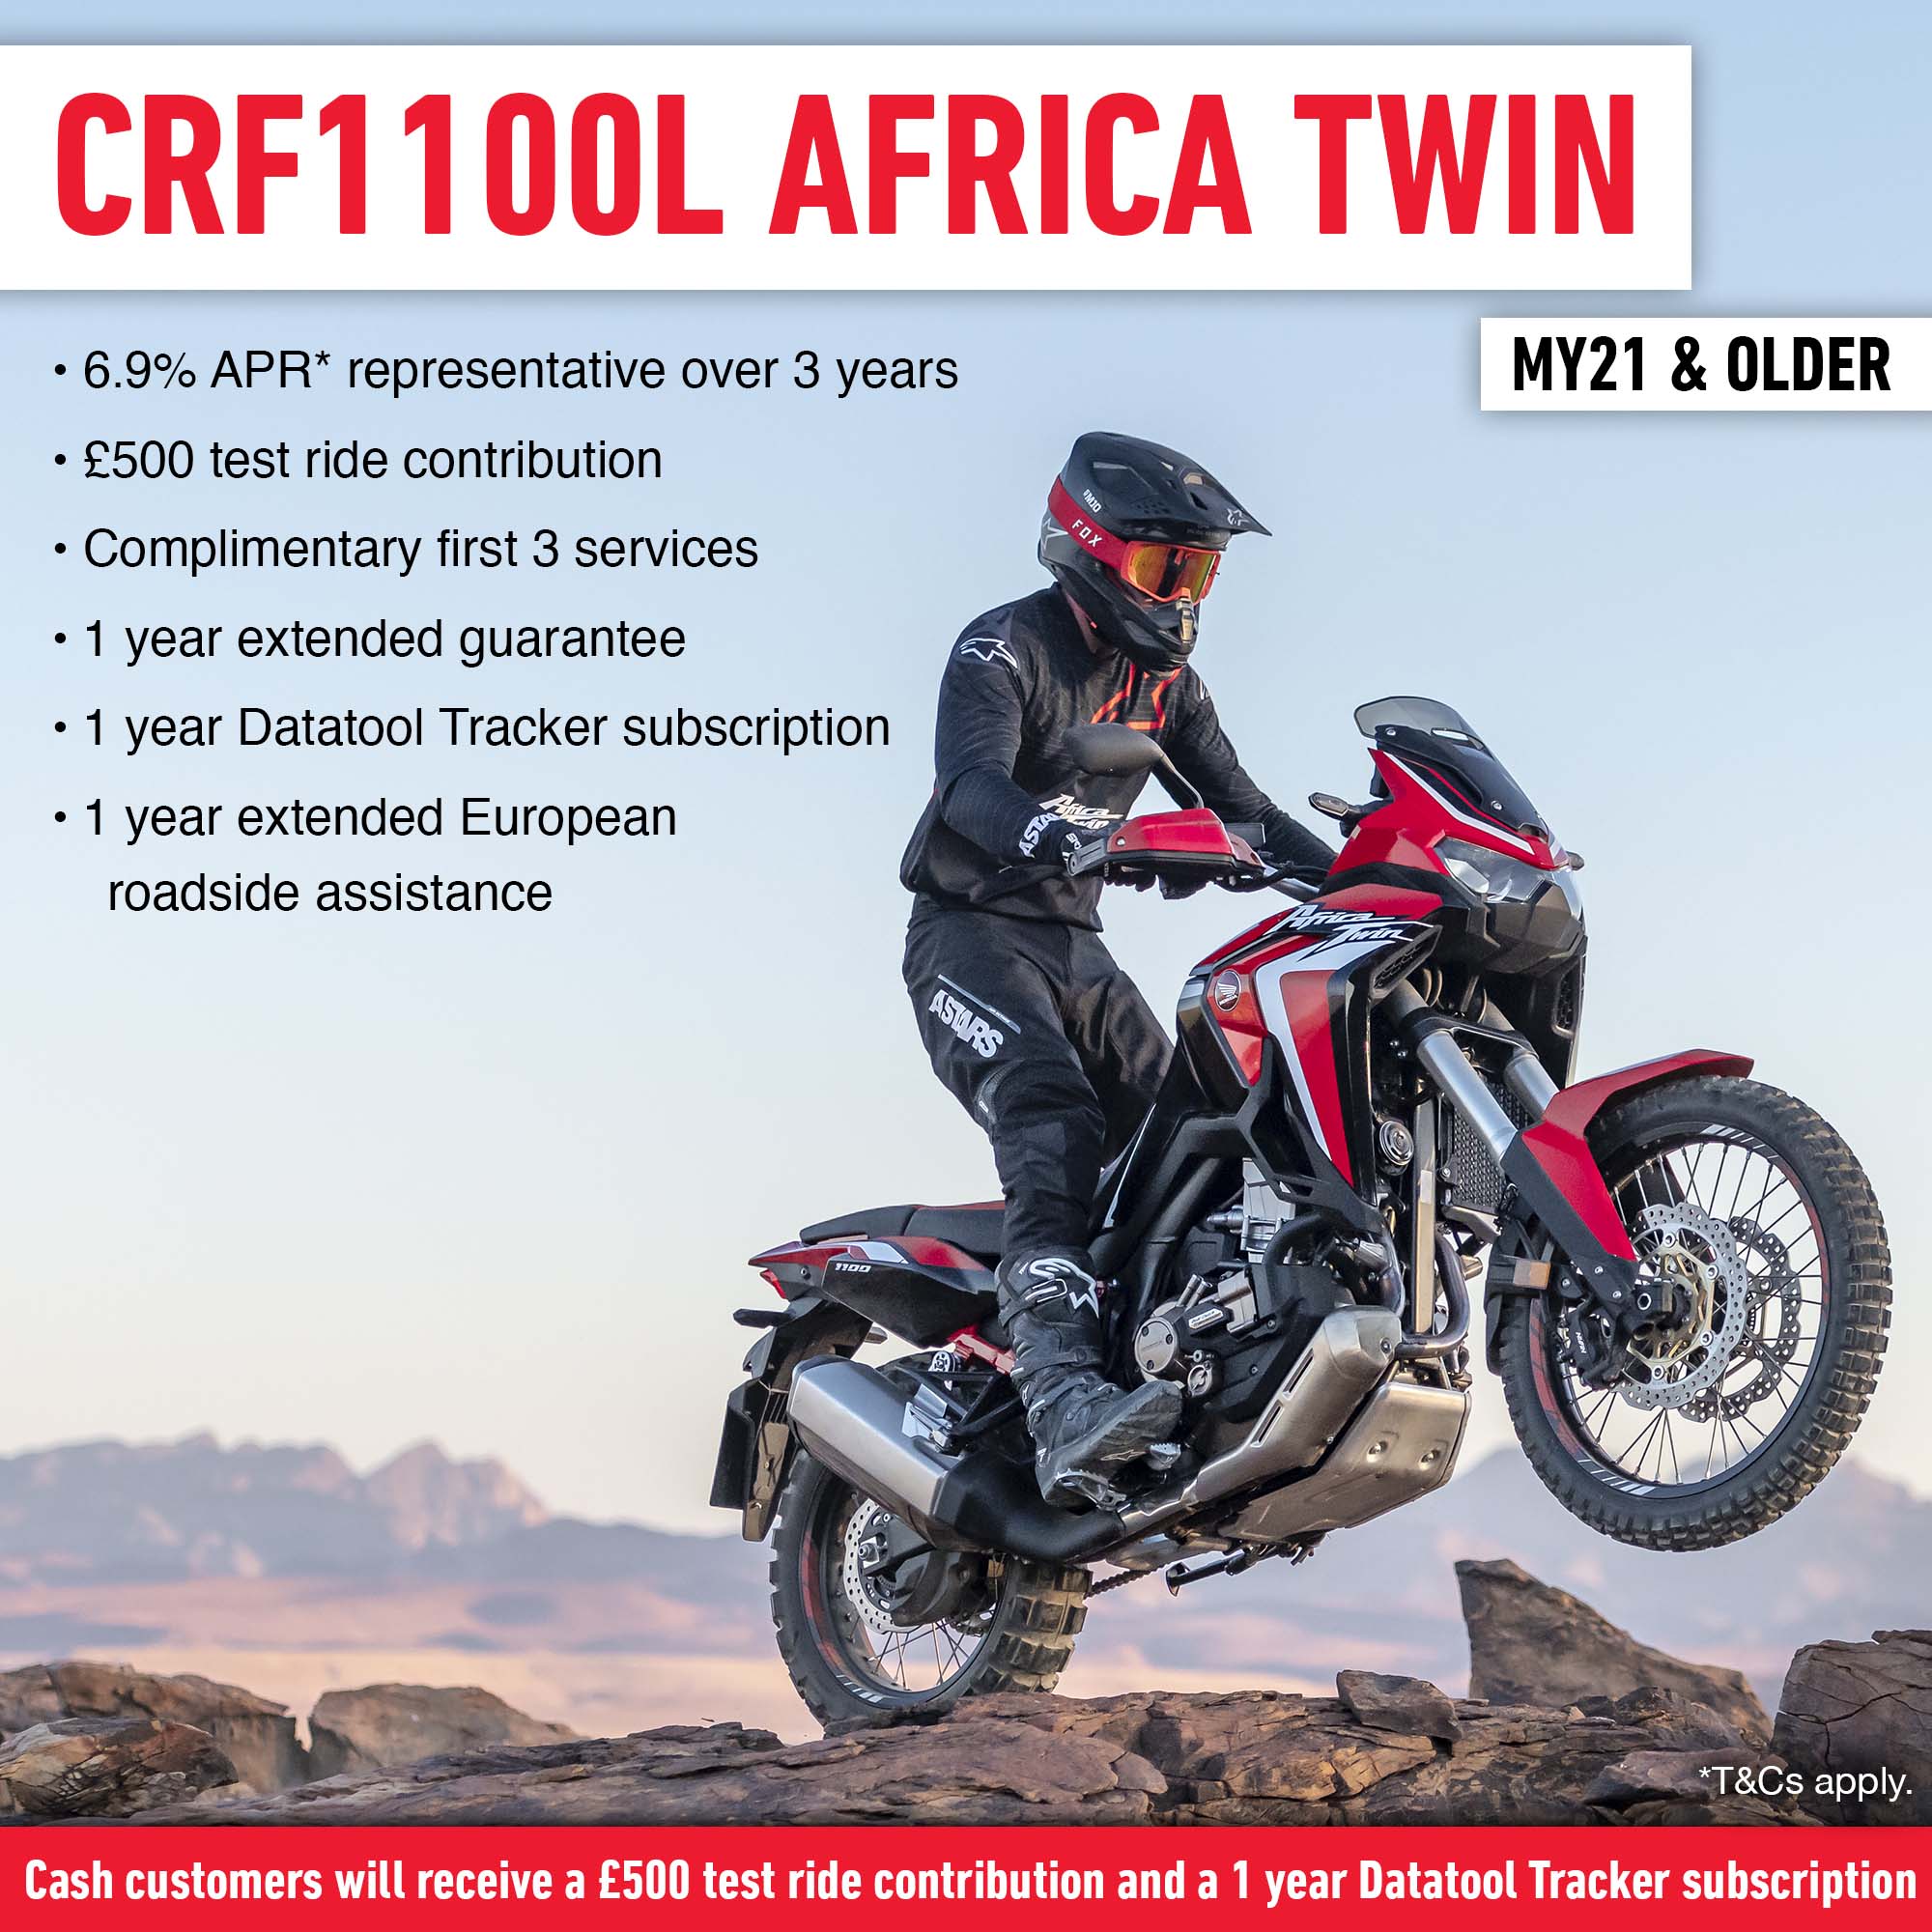 Brand new Honda finance offers on the CRF1100L Africa Twin MY21